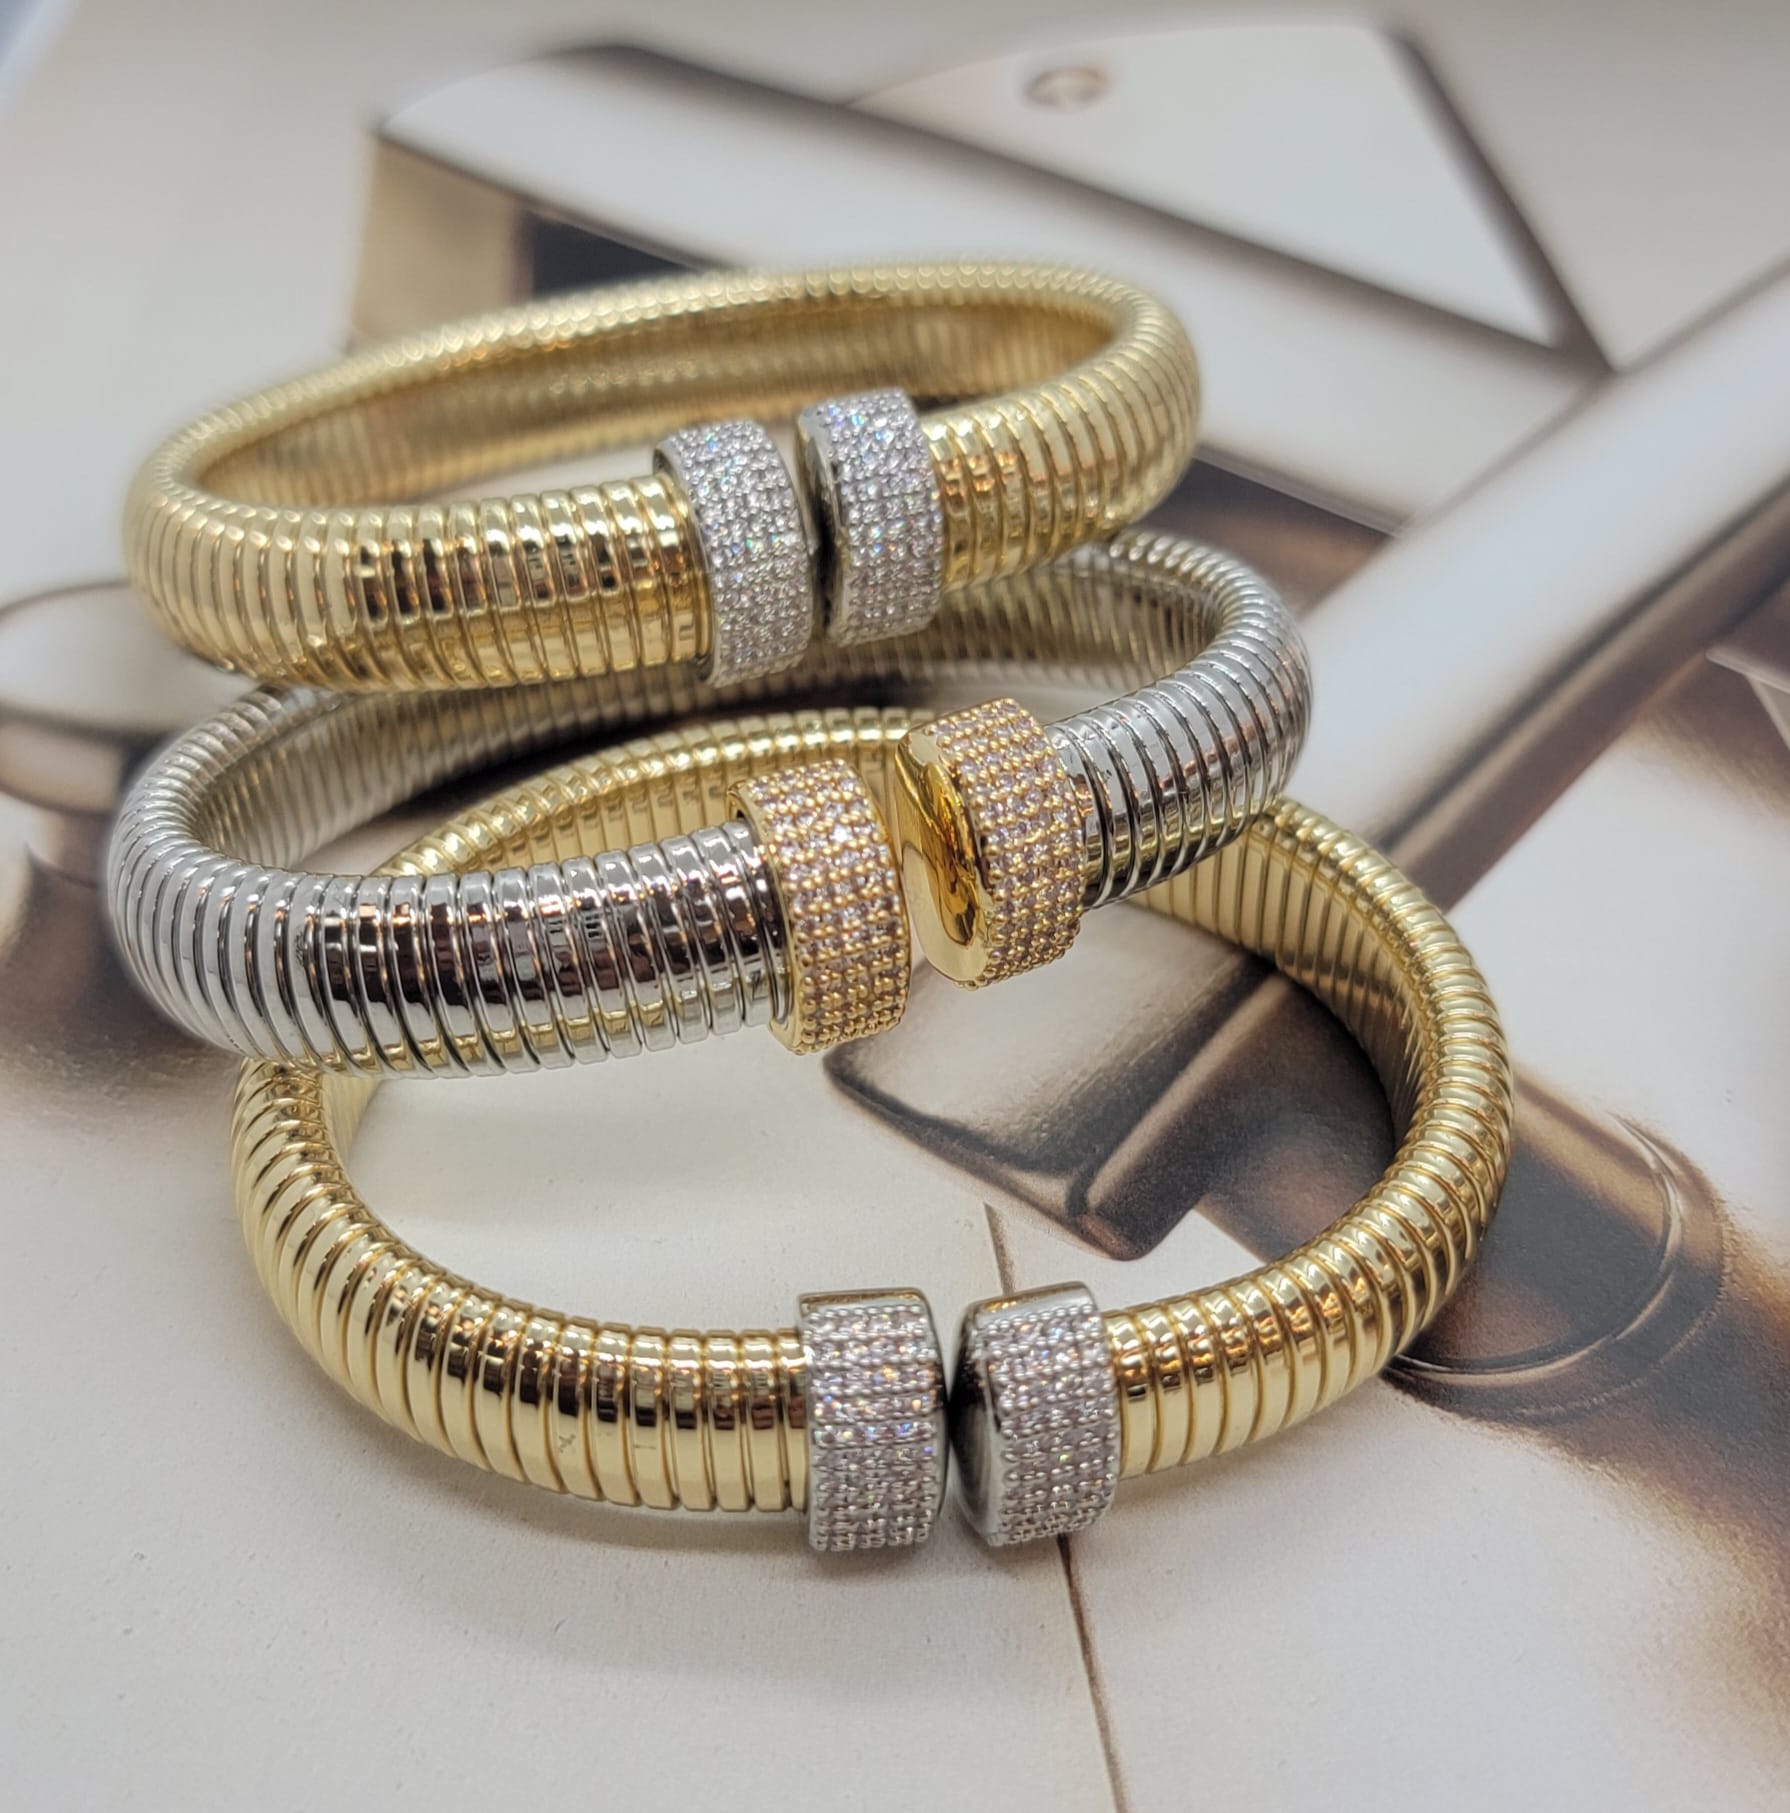 Gold and Silver Textured Stainless Steel Bracelet